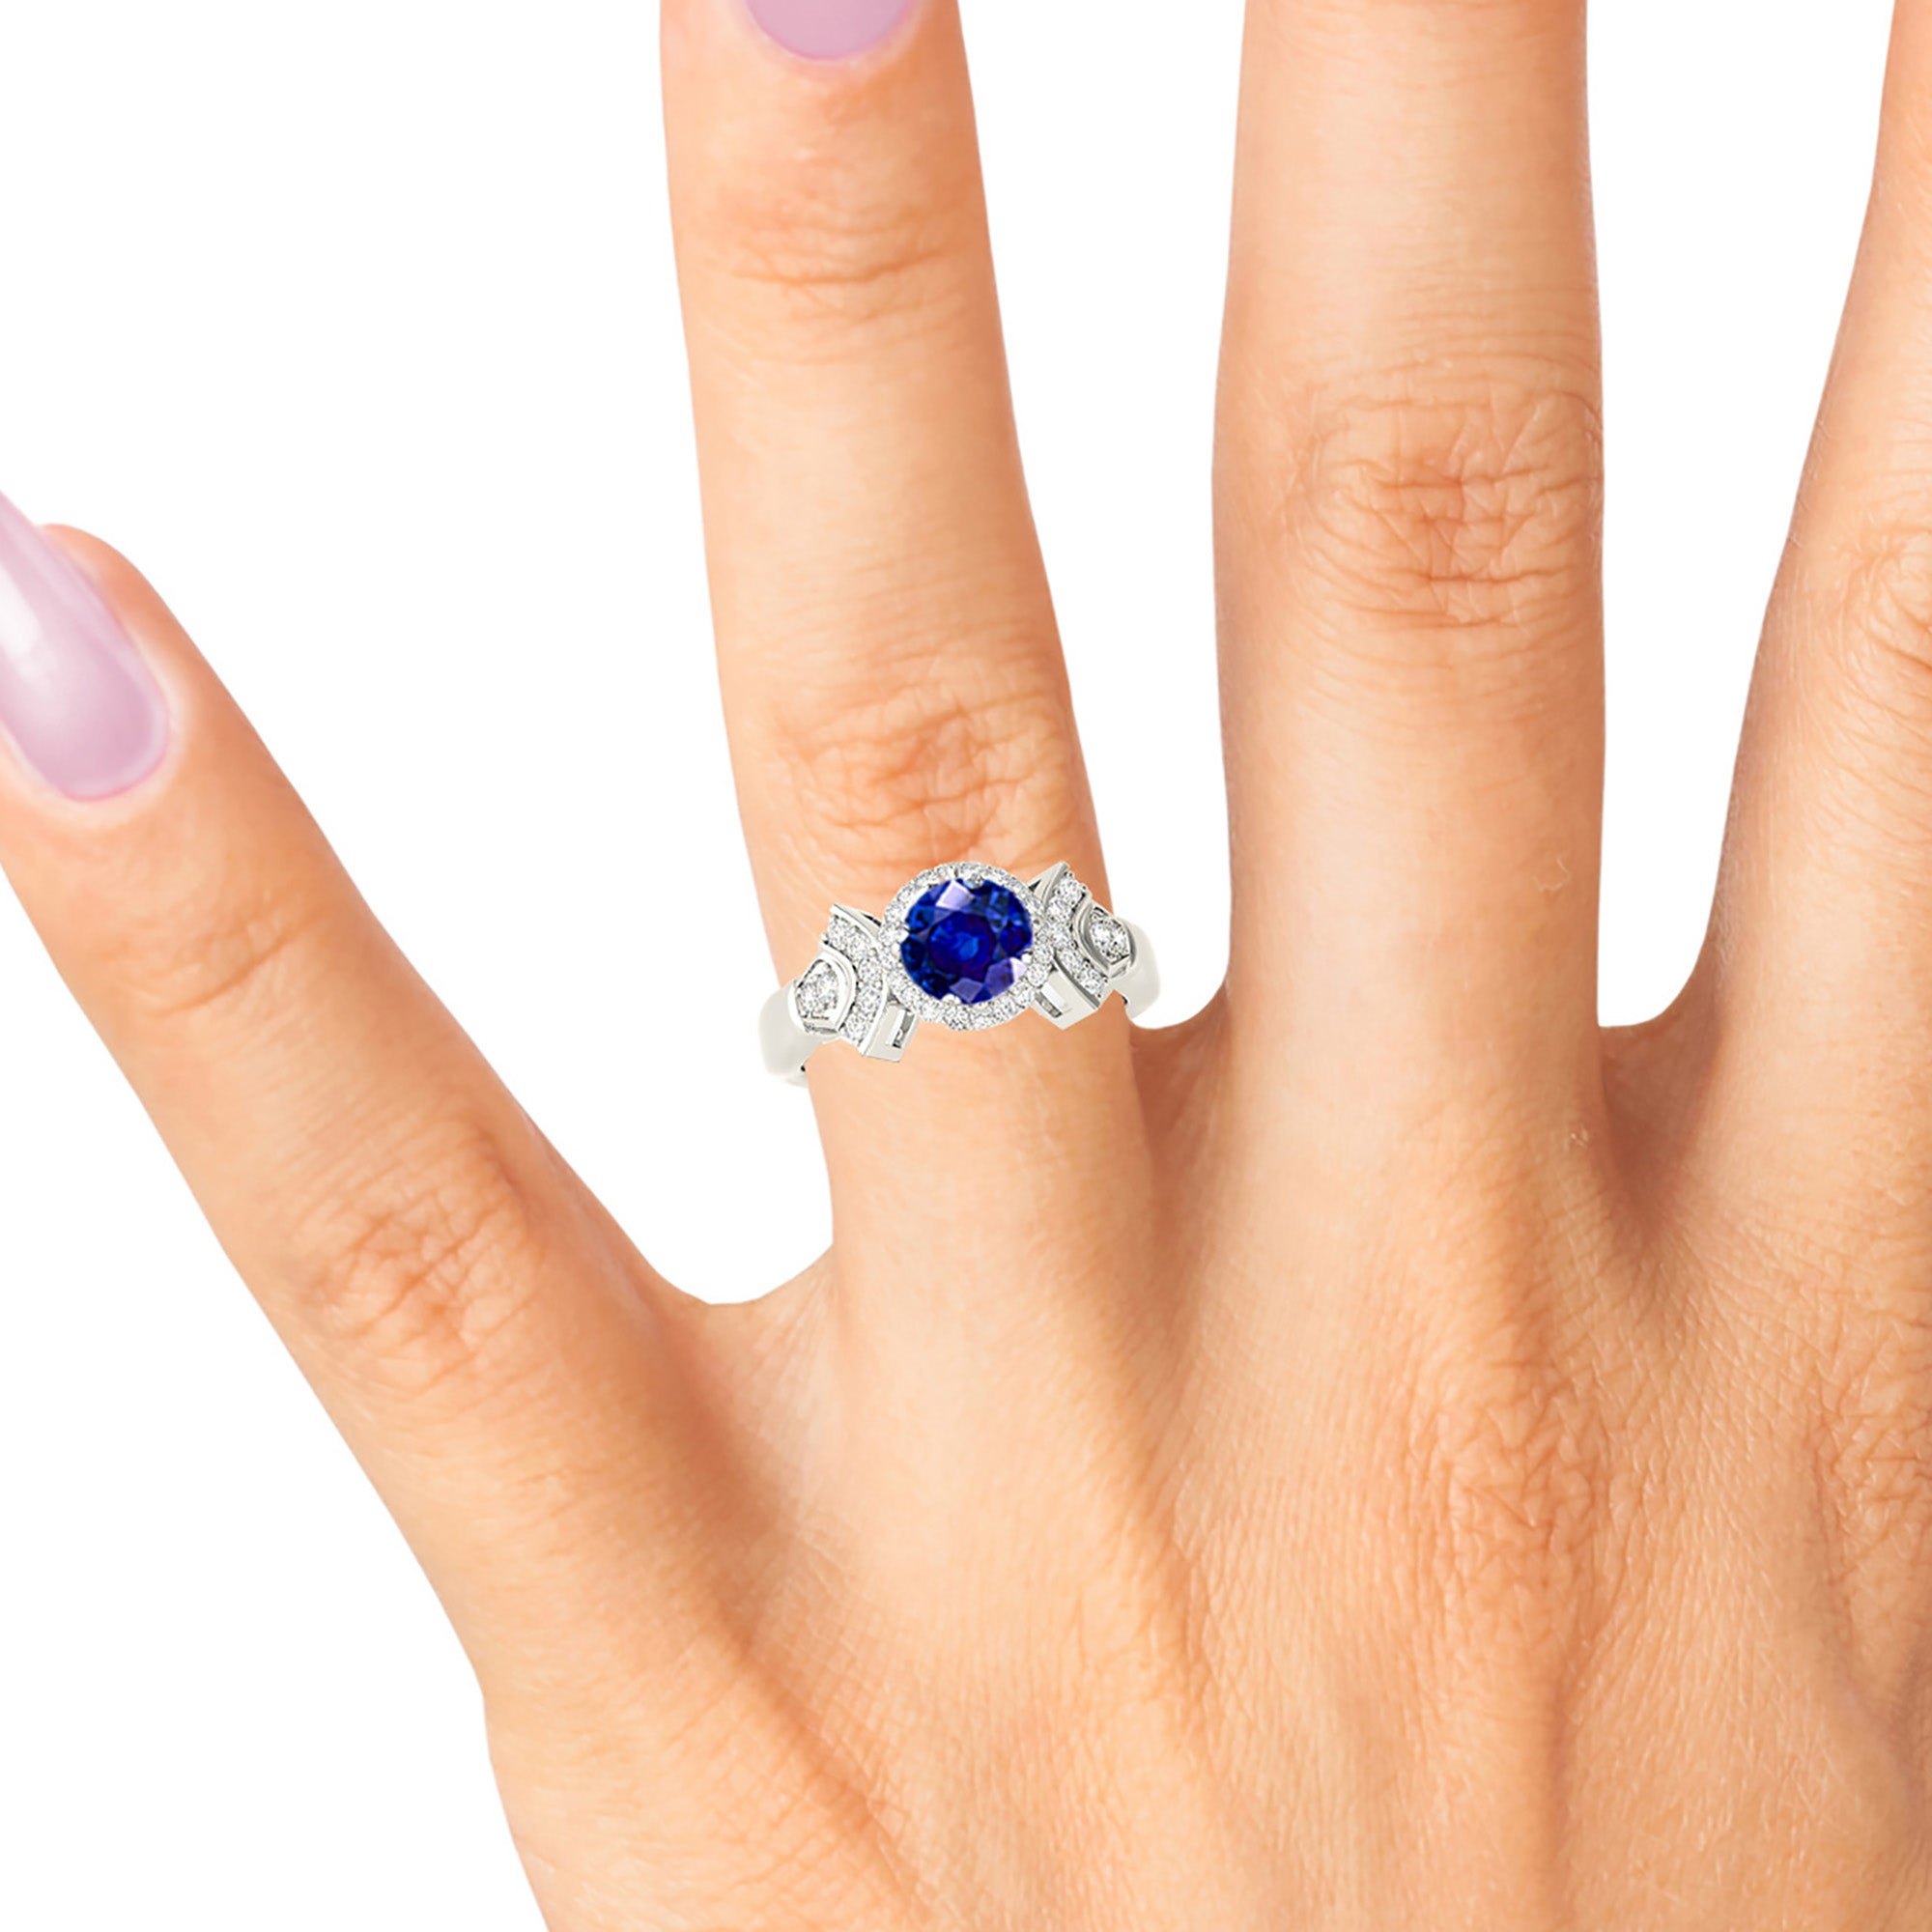 1.46 ct. Genuine Blue Sapphire Halo Ring Special Designed with 0.25 ctw. Side Diamonds-in 14K/18K White, Yellow, Rose Gold and Platinum - Christmas Jewelry Gift -VIRABYANI